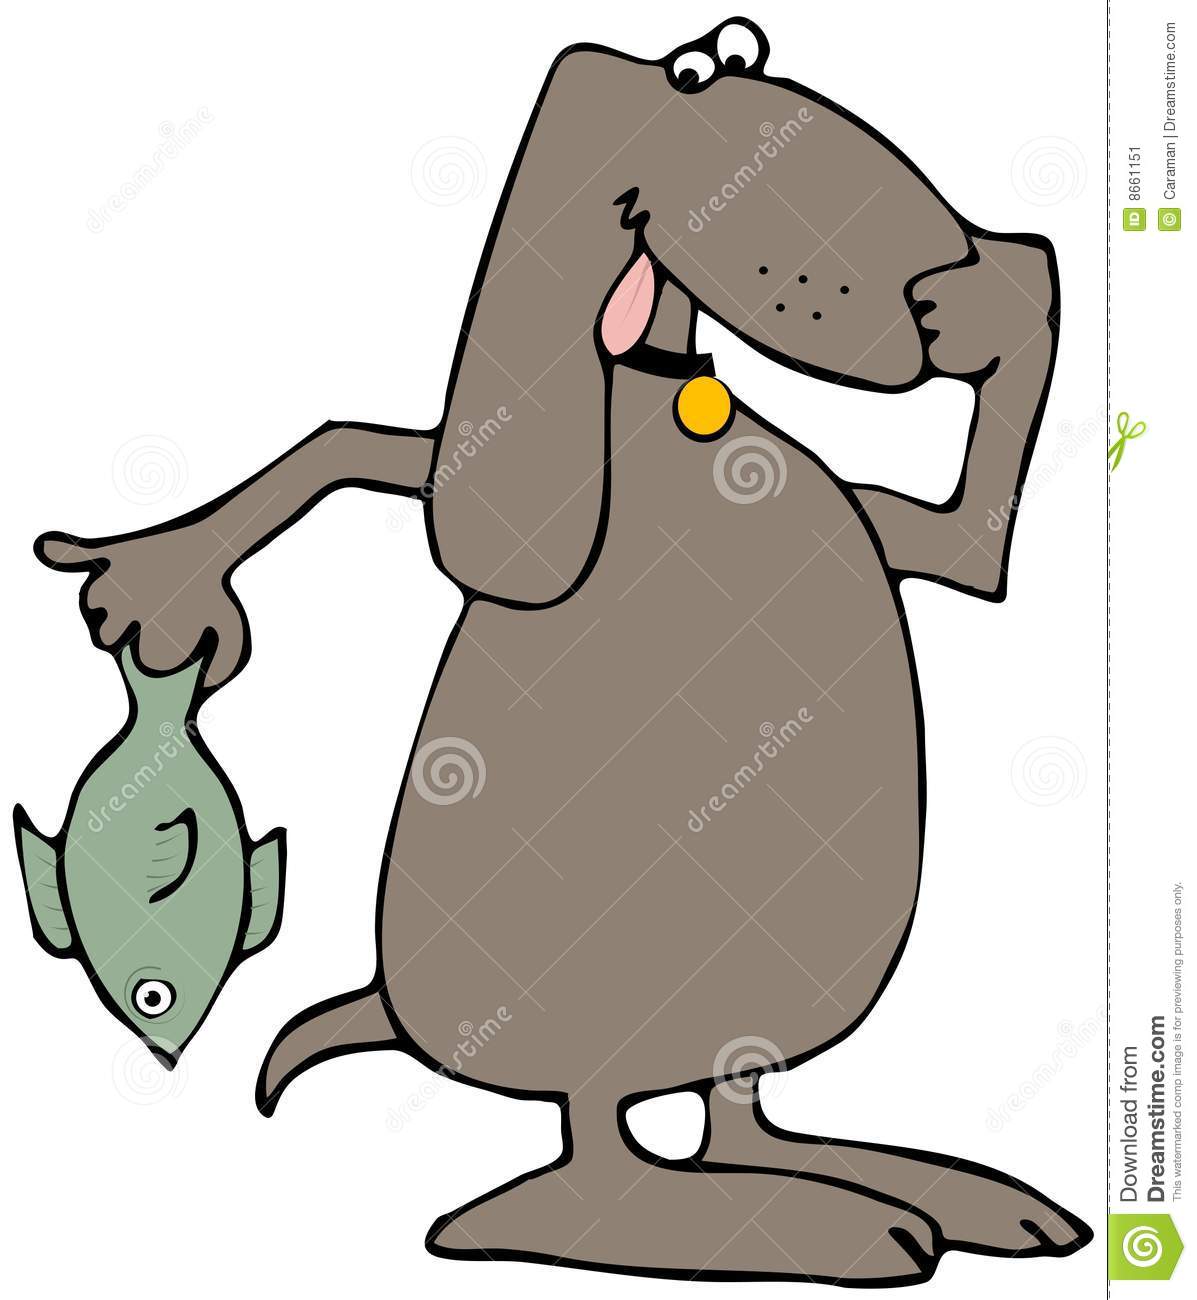 This Illustration Depicts A Dog Holding A Dead Fish And His Nose